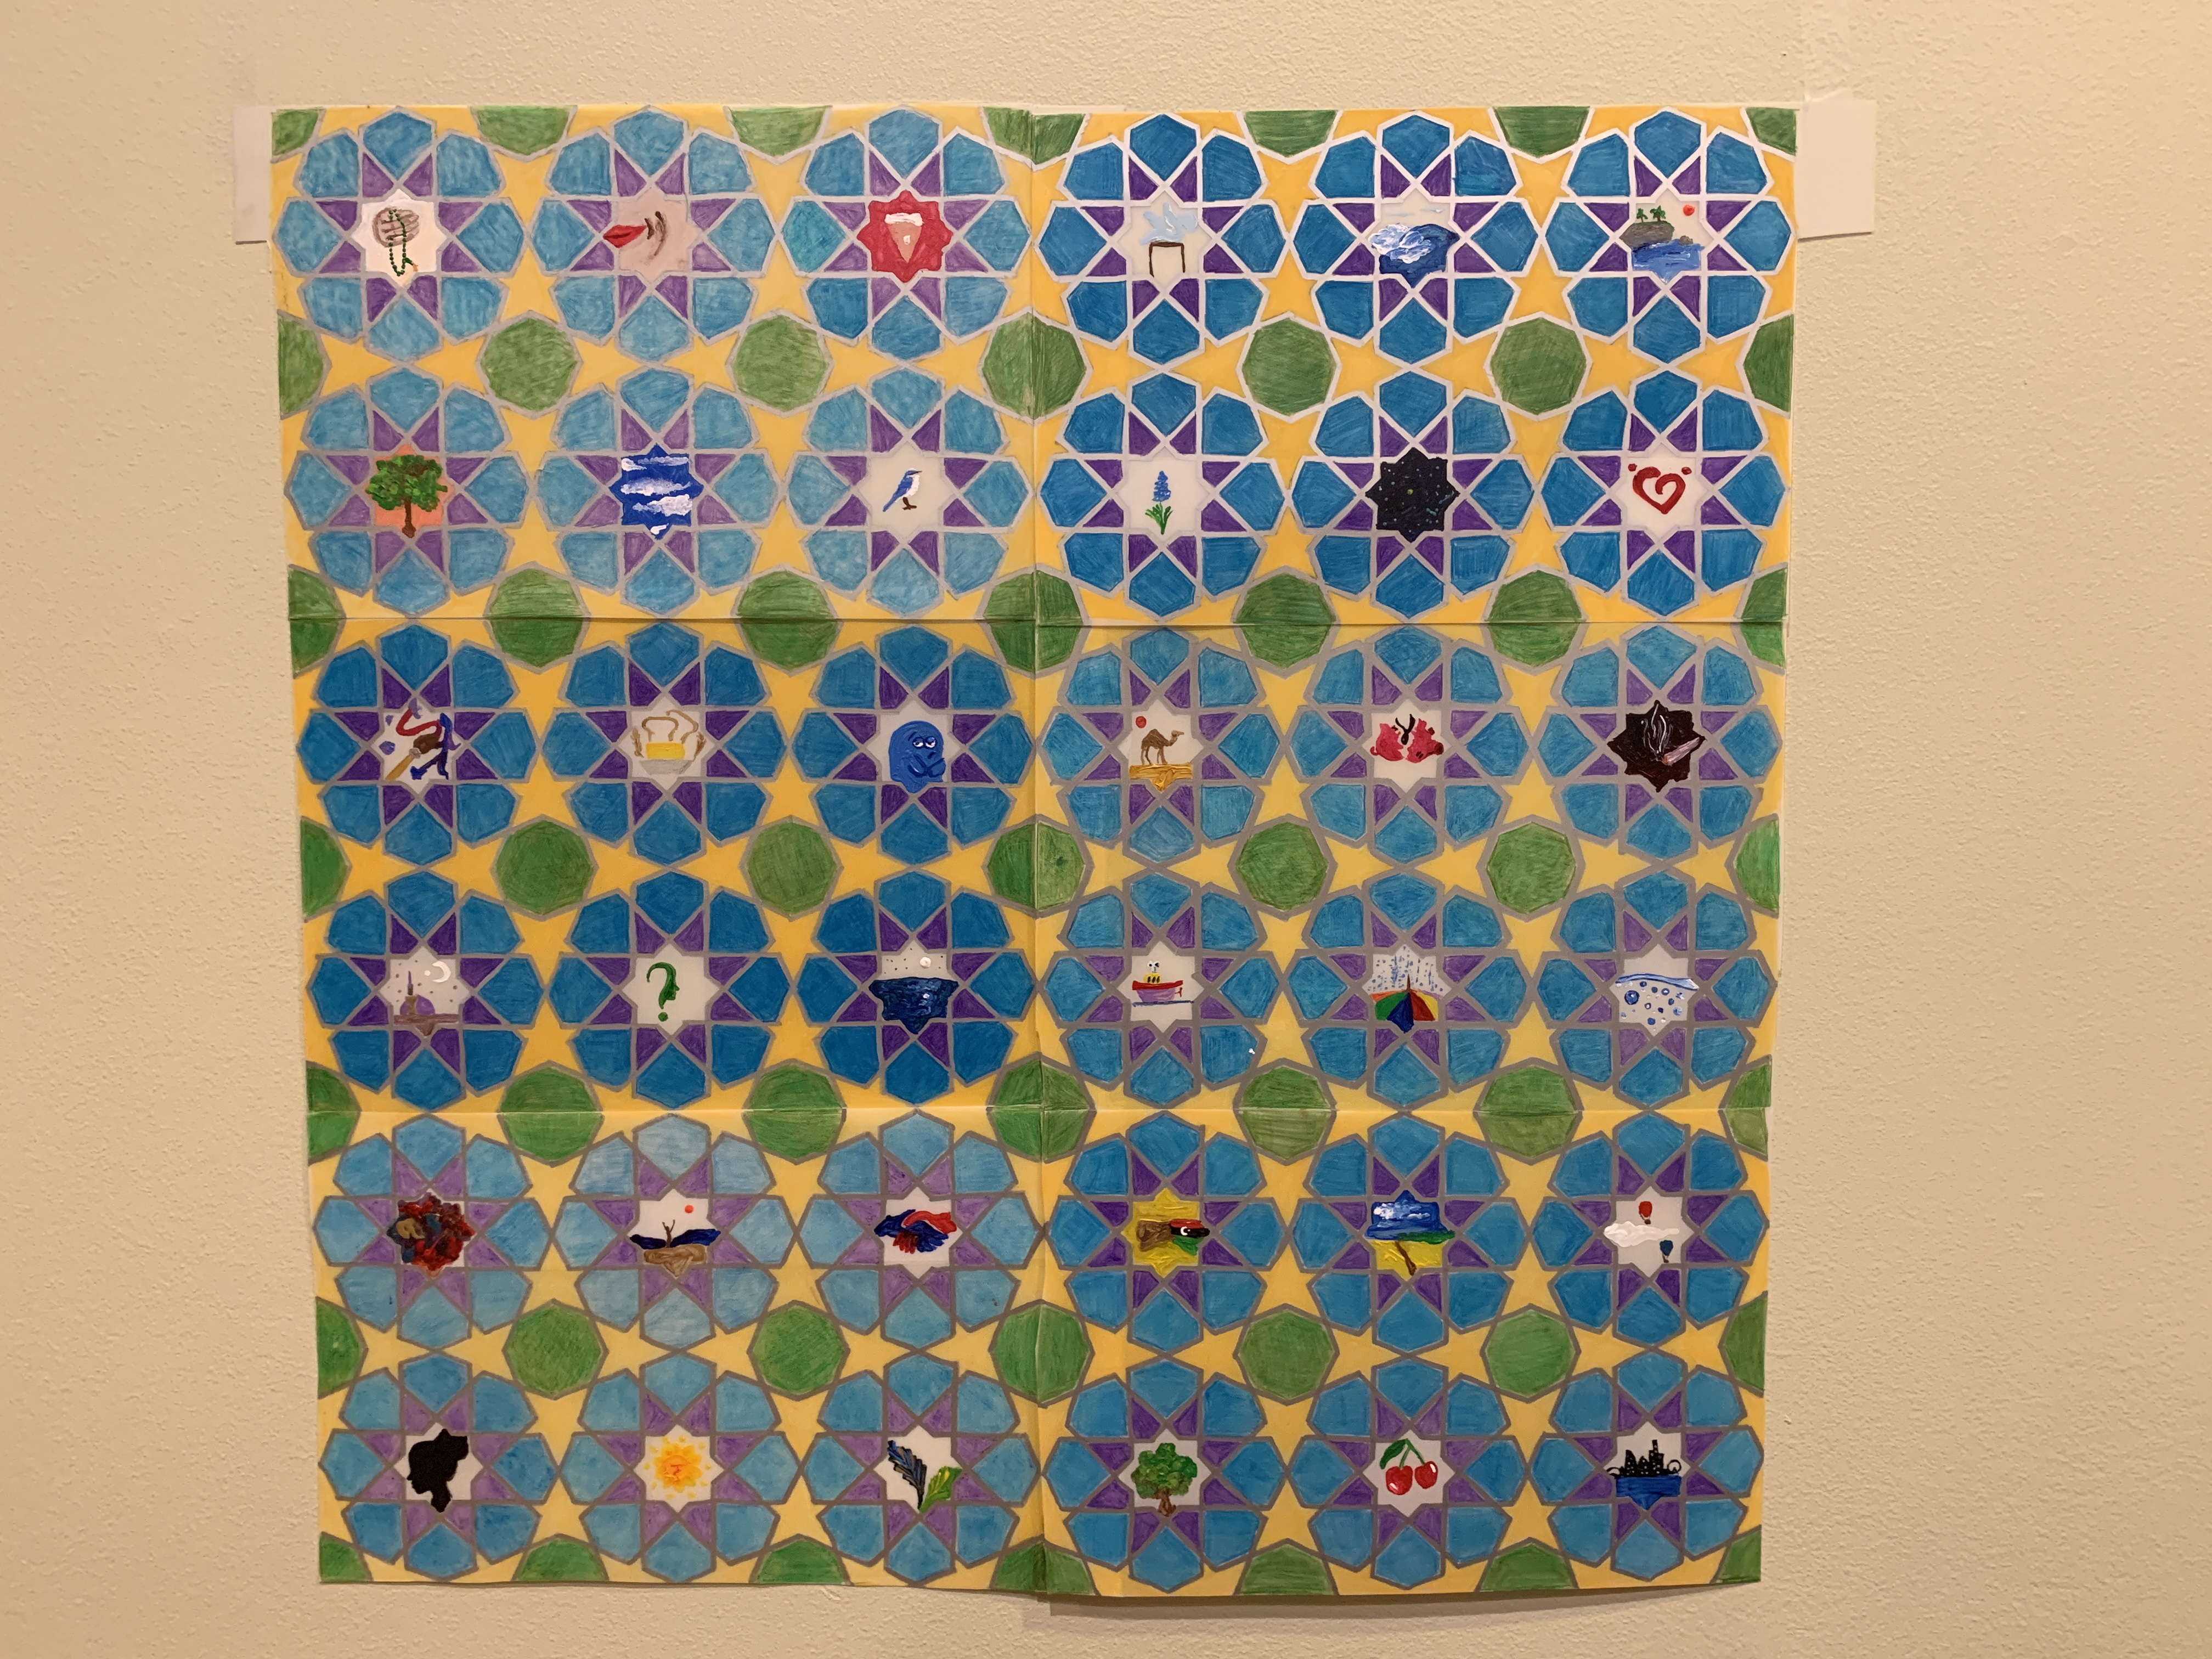 Tessellated Identities displayed in a gallery